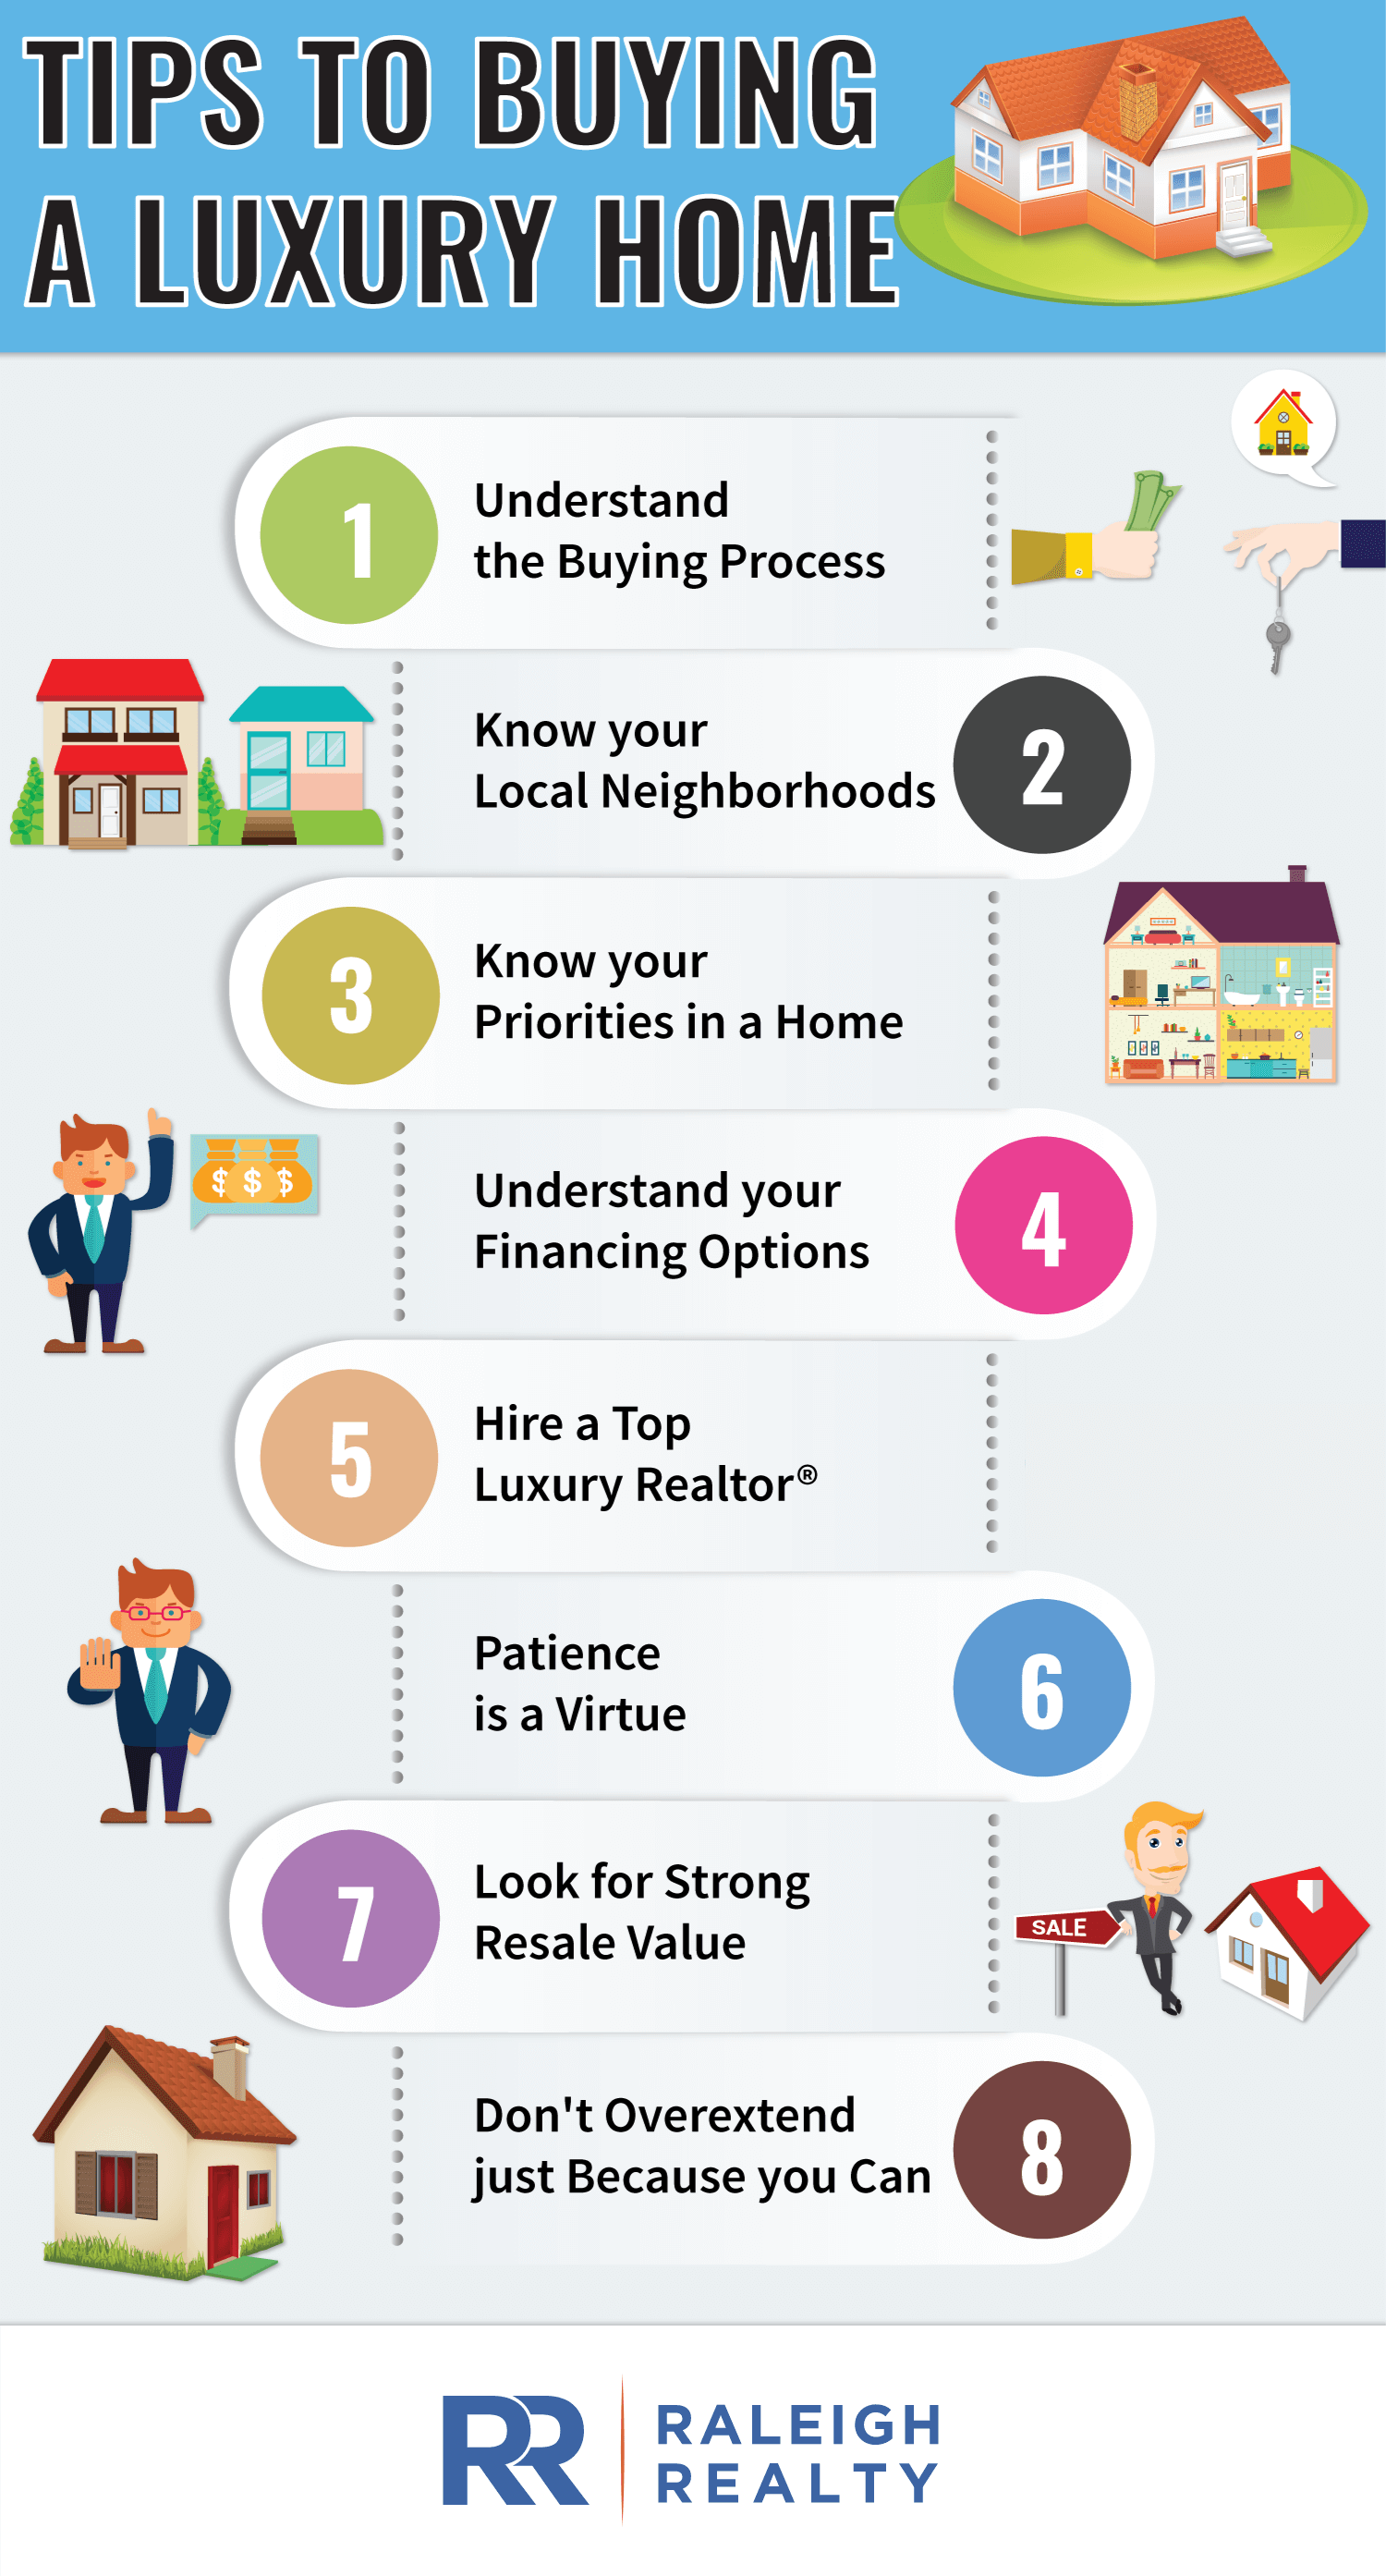 8 Luxury Home Buying Tips you Need to Know (INFOGRAPHIC)